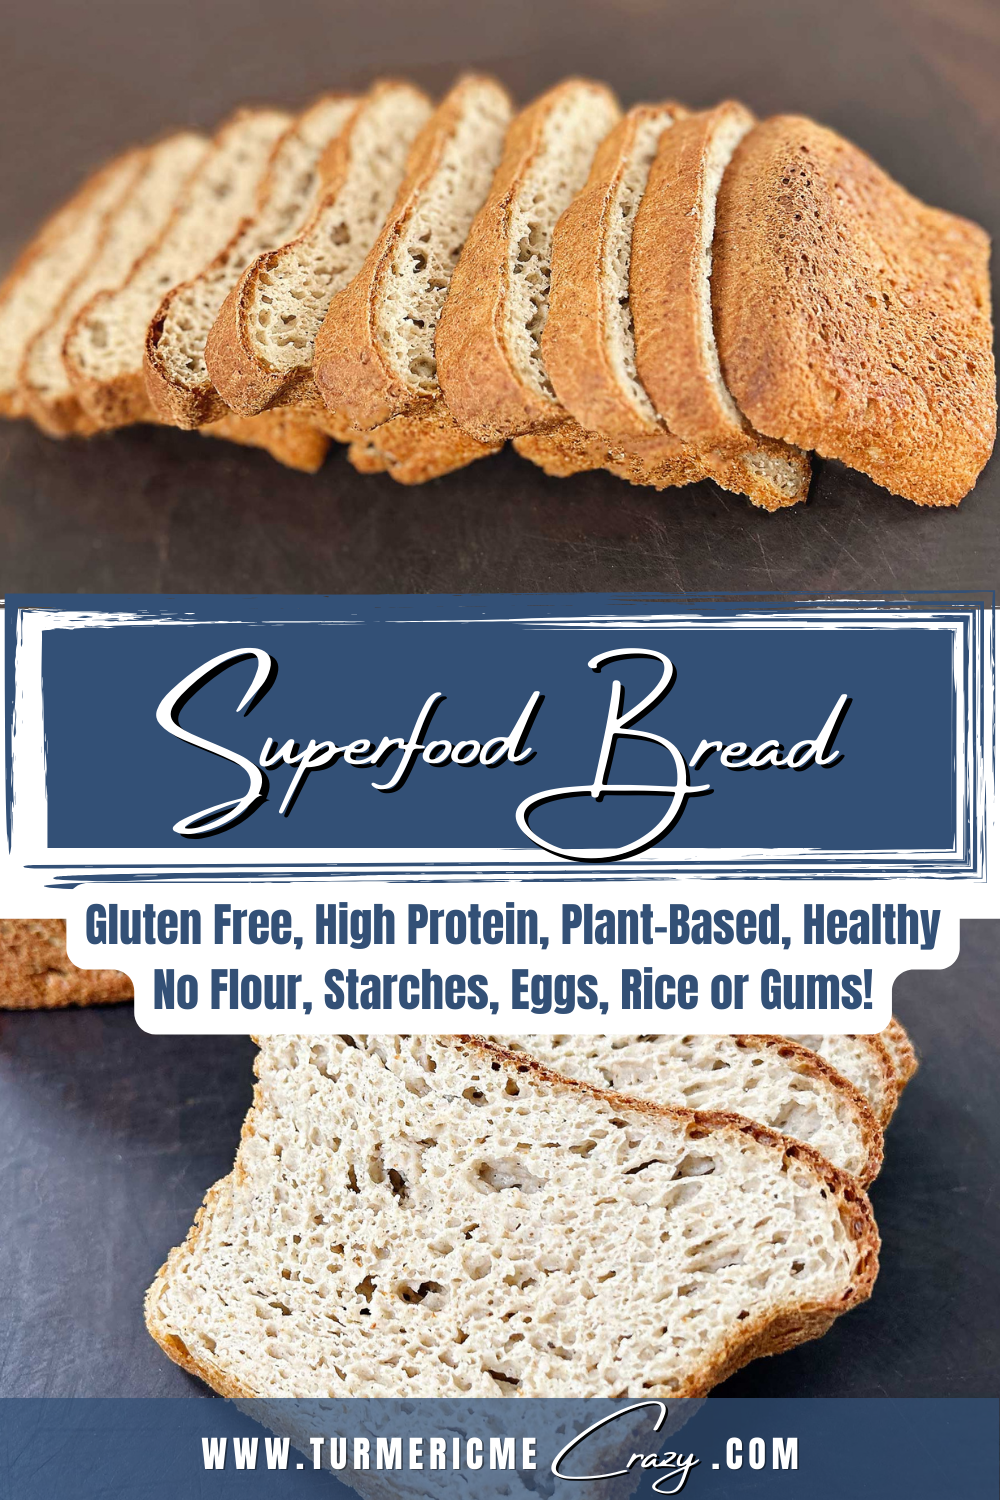 Elevate your baking game with our Superfood Gluten-Free Blender Bread recipe! 🍞 This easy-to-follow recipe not only caters to gluten-sensitive individuals but also introduces a powerhouse of superfoods for a bread that's as nutritious as it is delicious. Perfect for a quick breakfast, a wholesome snack, or a guilt-free treat, this blender bread will quickly become a staple in your kitchen #GlutenFreeBread #SuperfoodRecipe #HealthyBaking #BlenderBread #NutrientPacked #GlutenFreeLiving #EasyRecipes